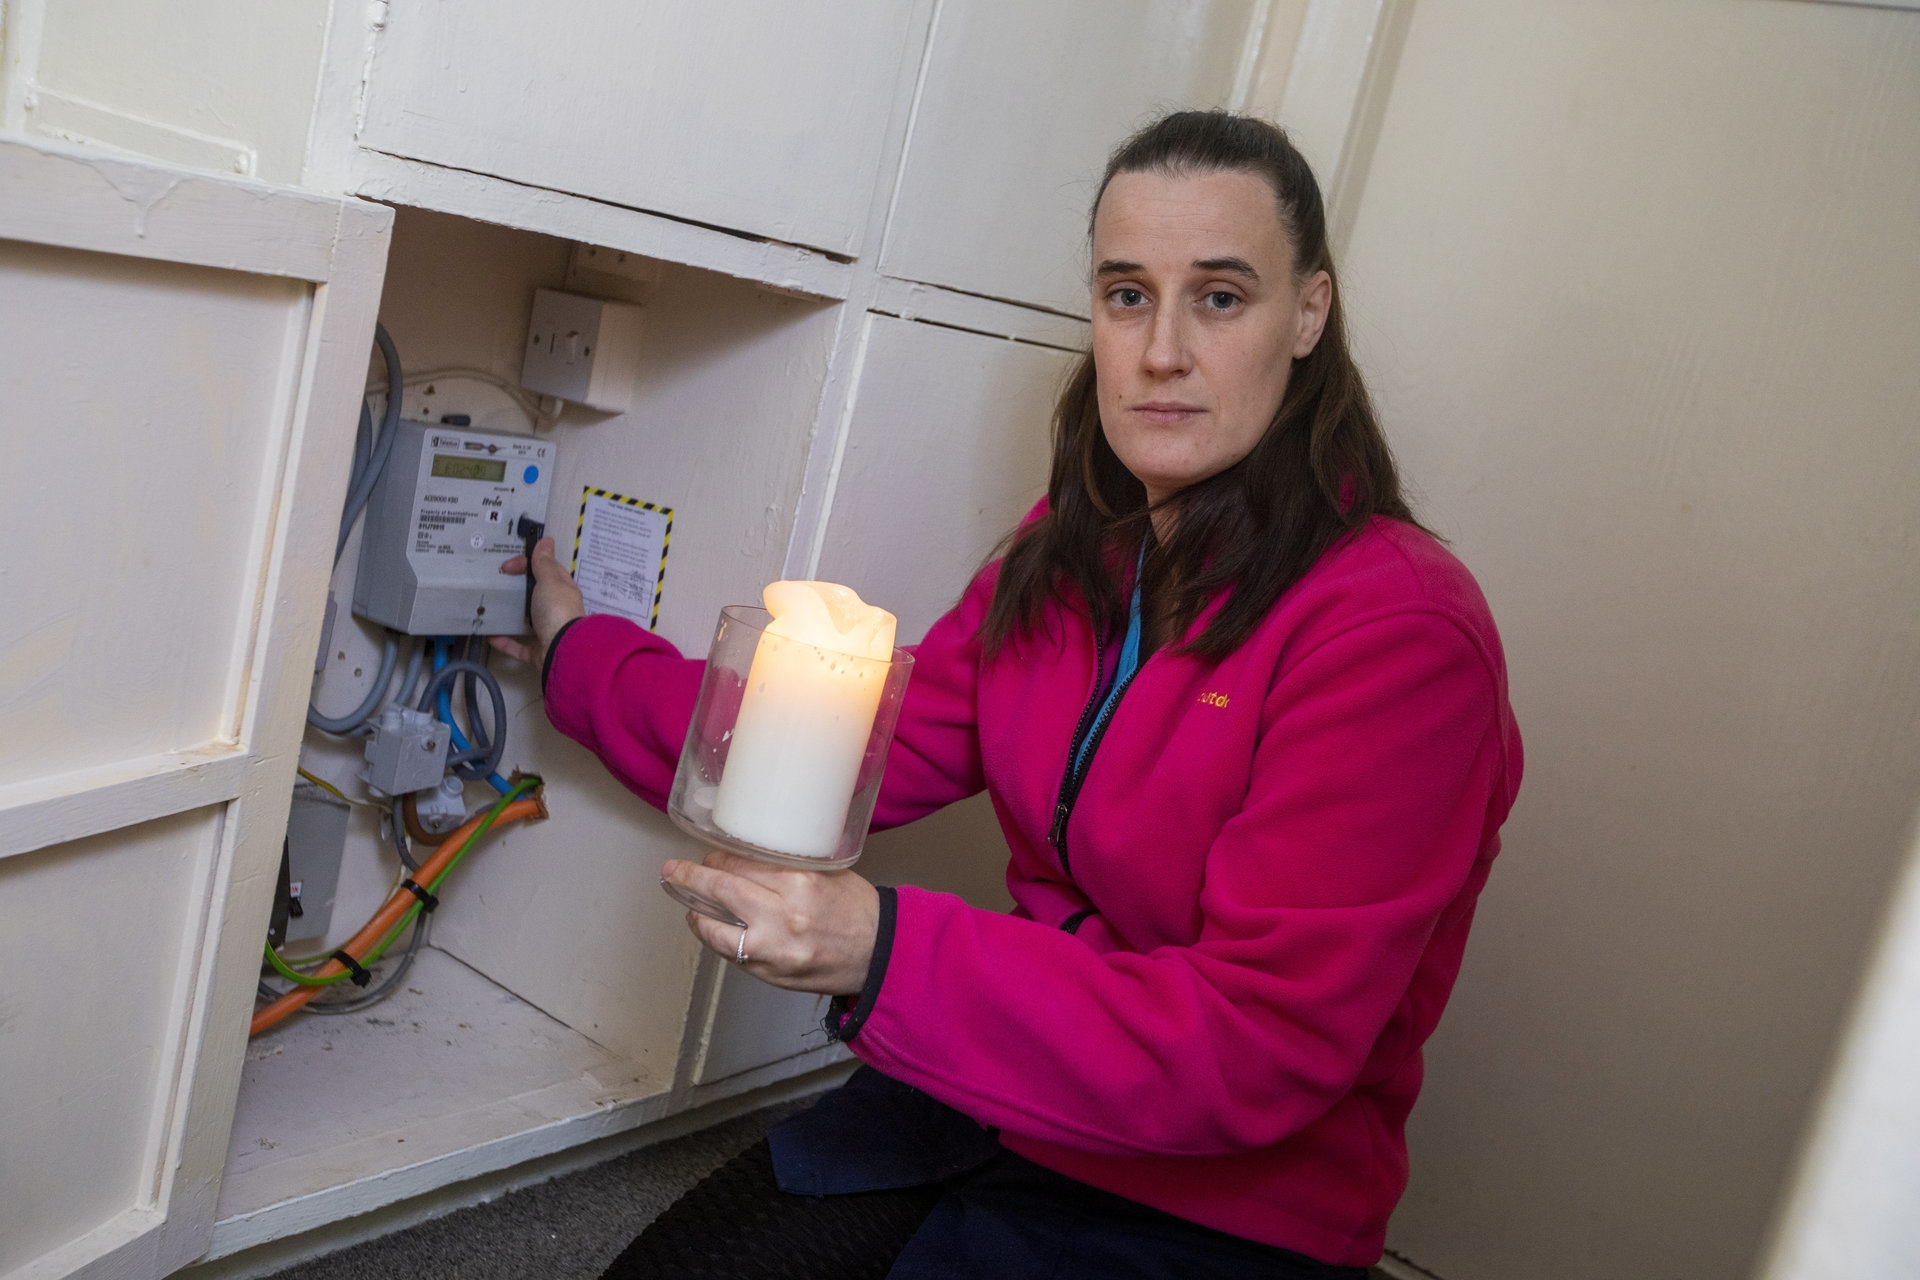 The cleaner spends the majority of her salary towards her electricity meter.